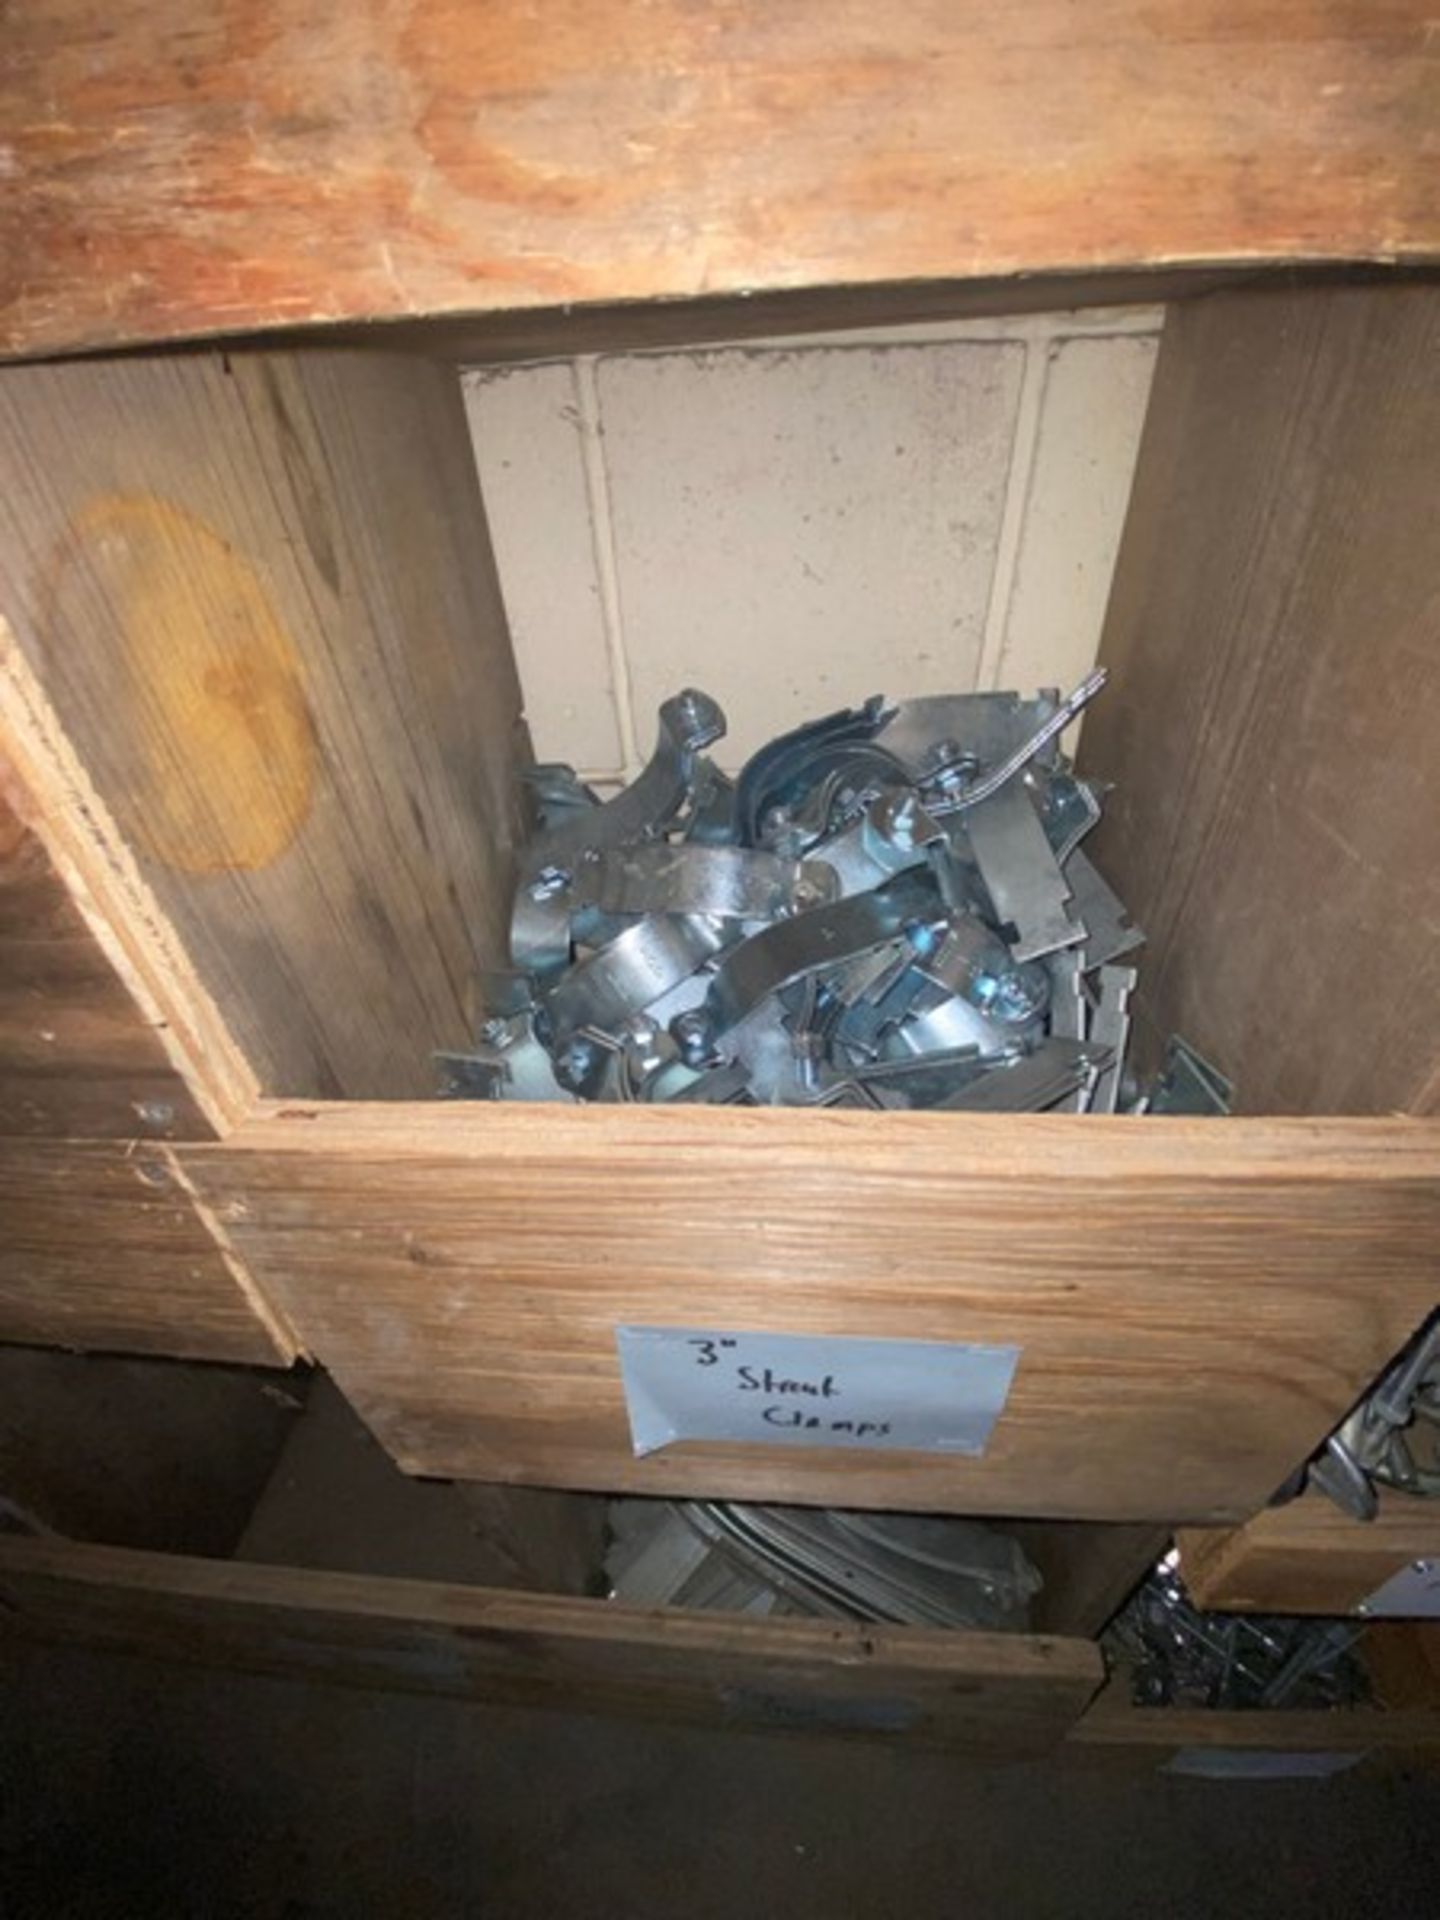 Contents of (25) Cubby's, Includes 1-1/4" Copper Strut Clamps, 3-1/2" Strut Clamps, 4" Copper - Image 28 of 28